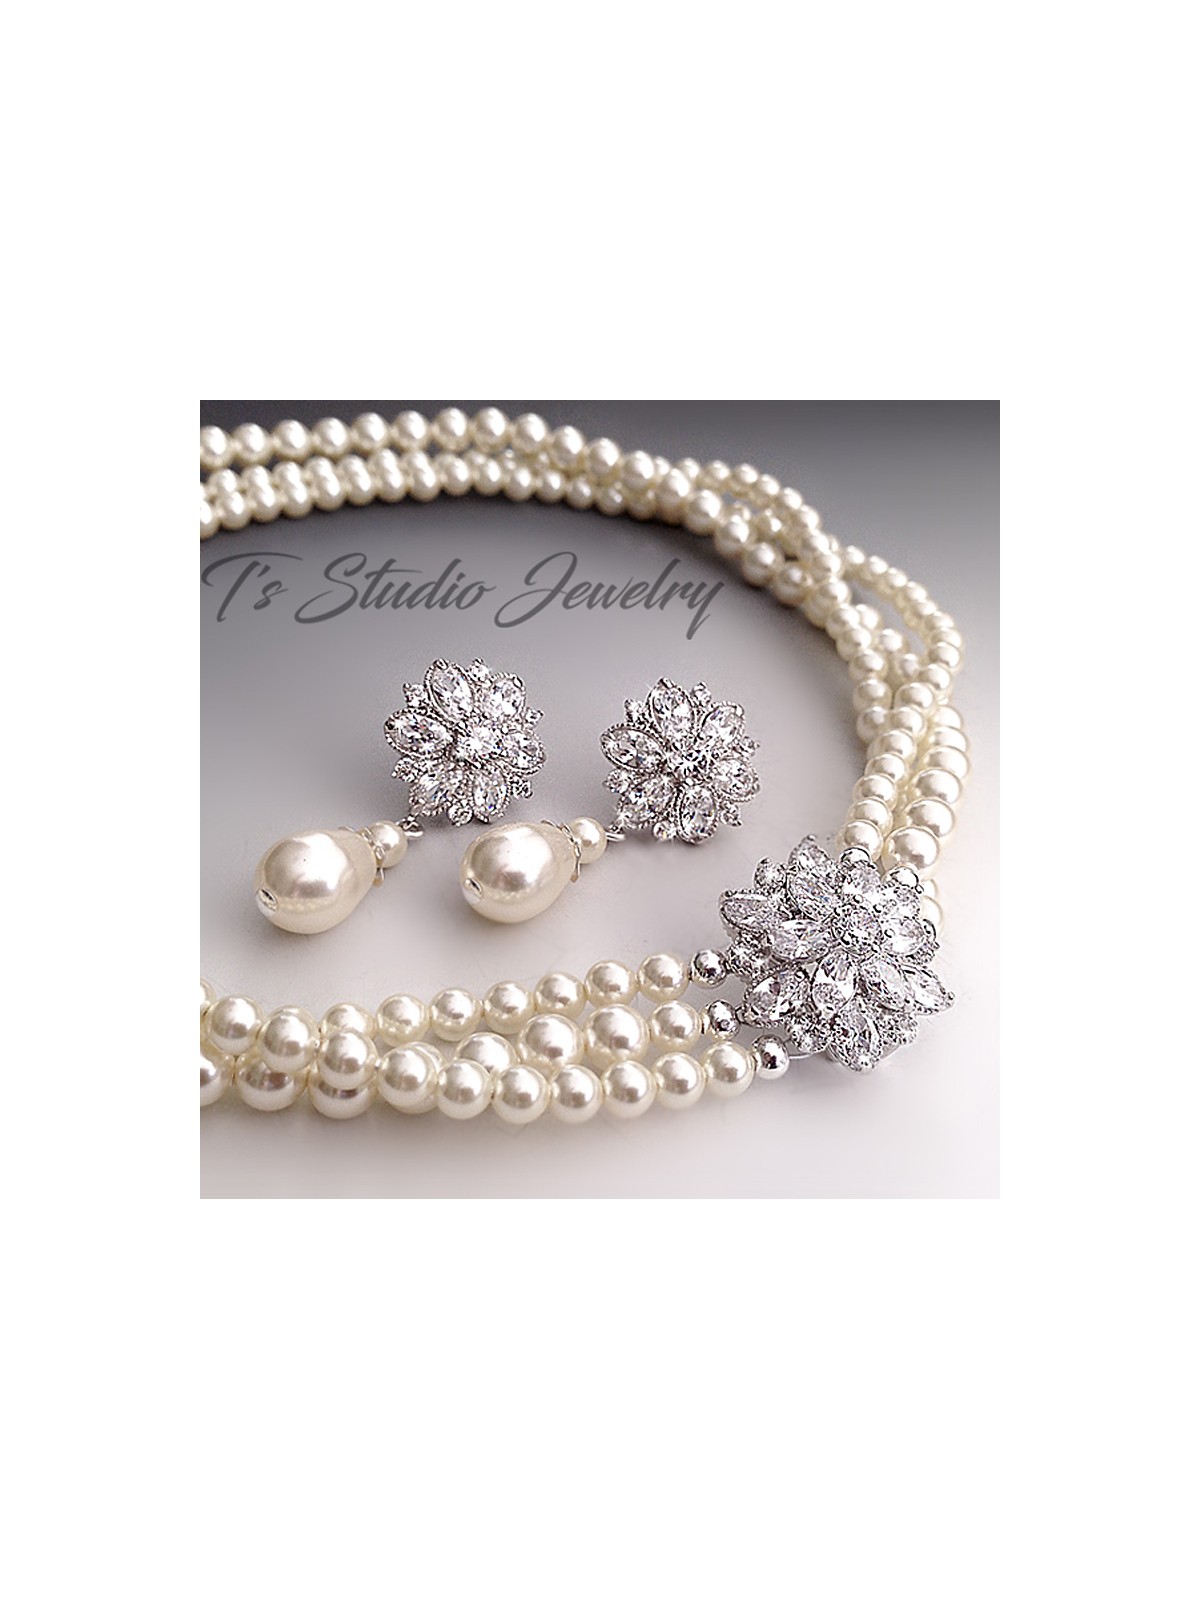 CZ Crystal Flower & Pearl Bridal Necklace and Earrings Set